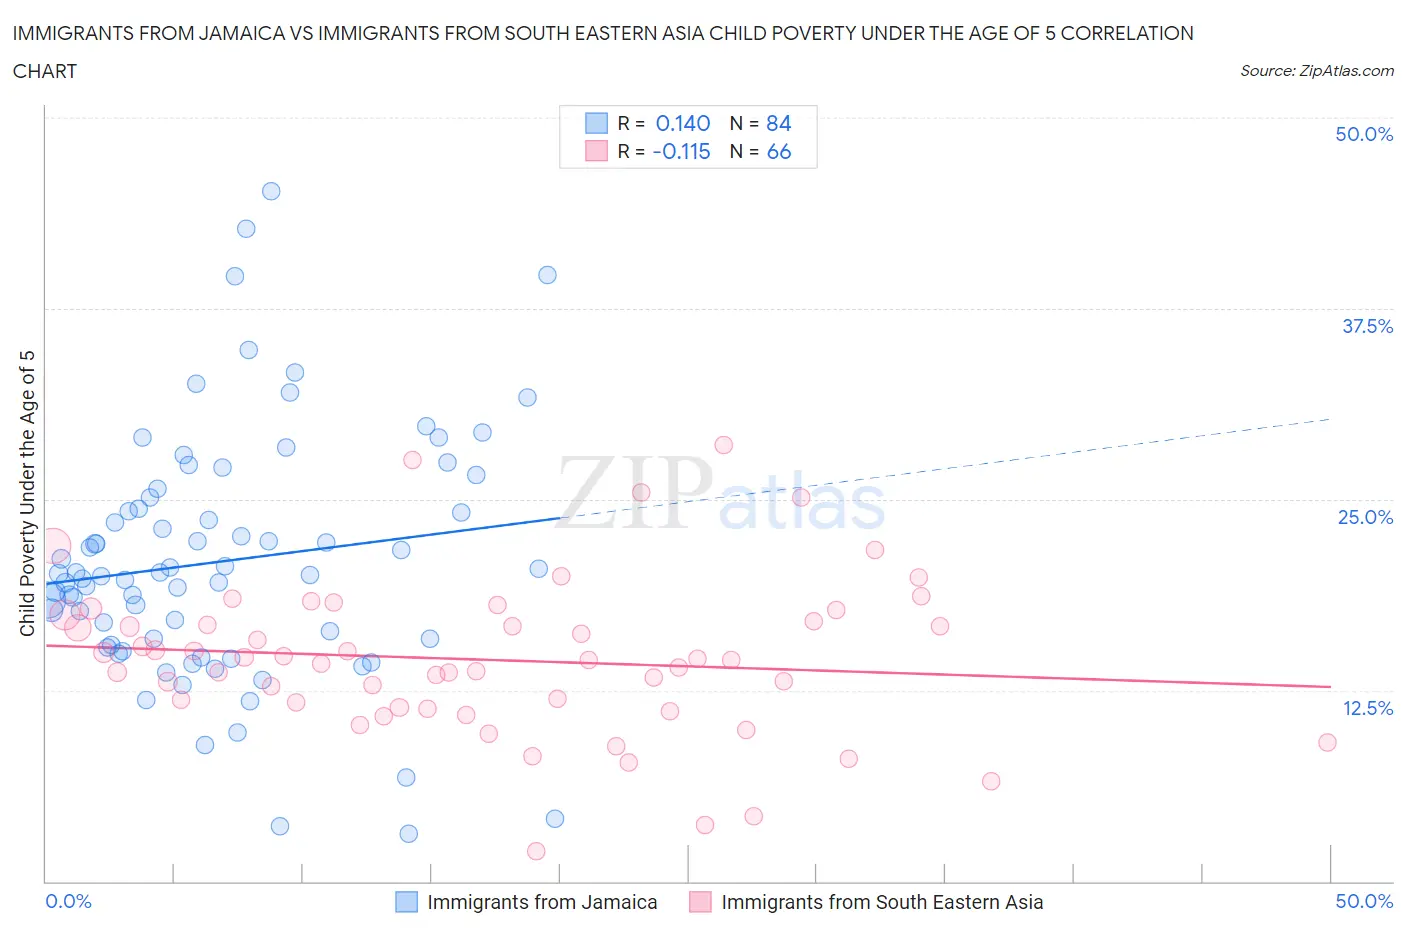 Immigrants from Jamaica vs Immigrants from South Eastern Asia Child Poverty Under the Age of 5